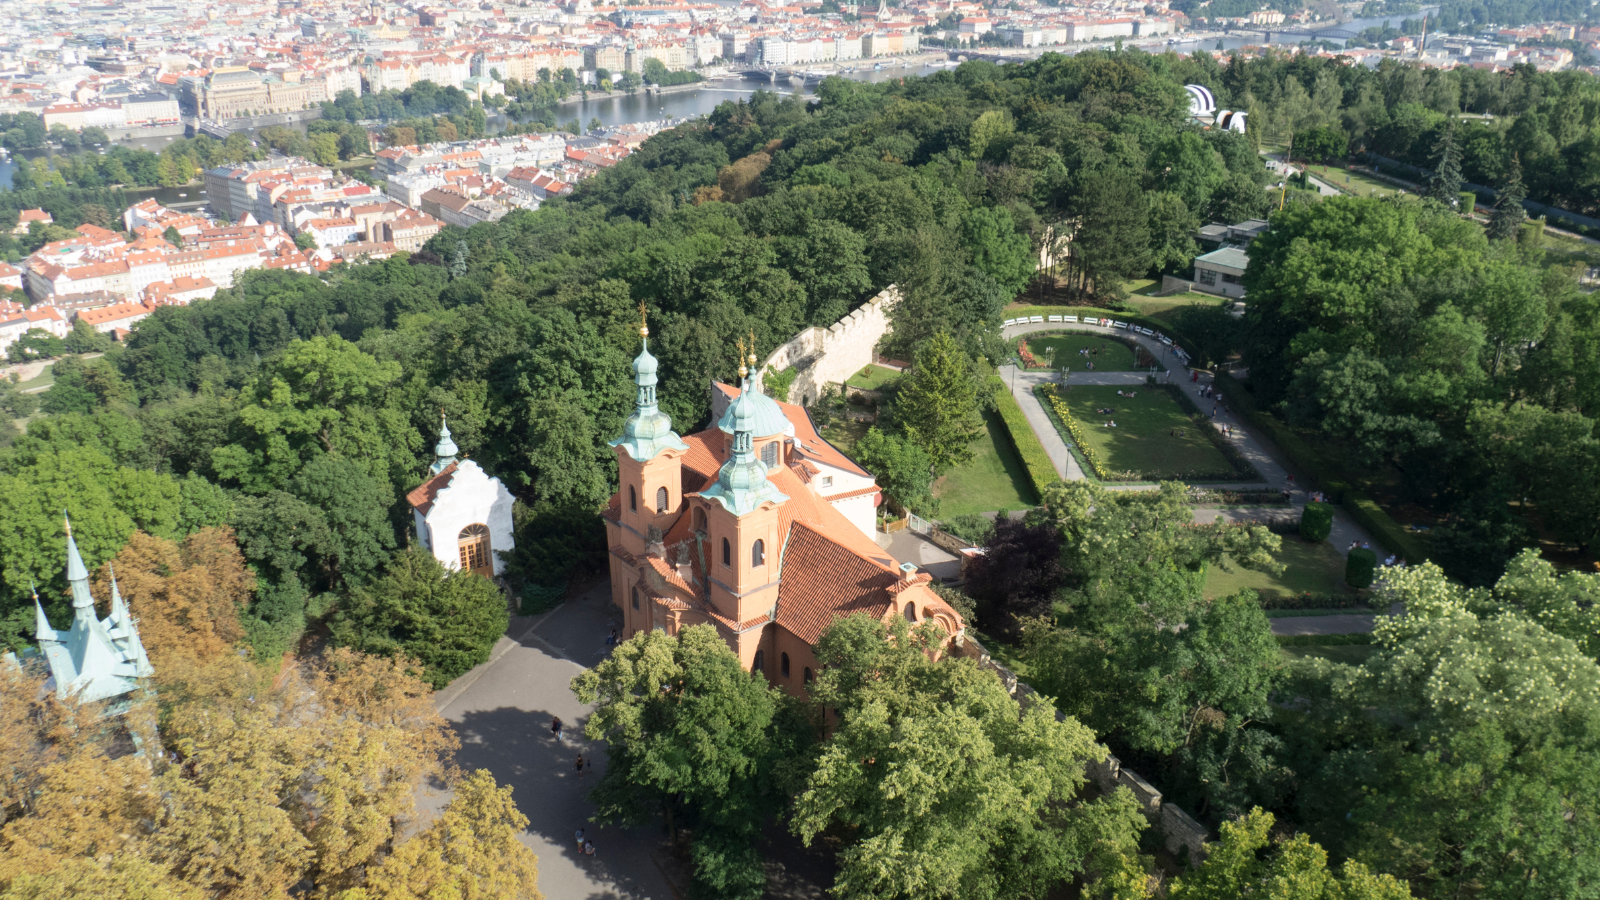 Seventh option in the list of 10 options to see in Prague in 1 day - Petřín Hill